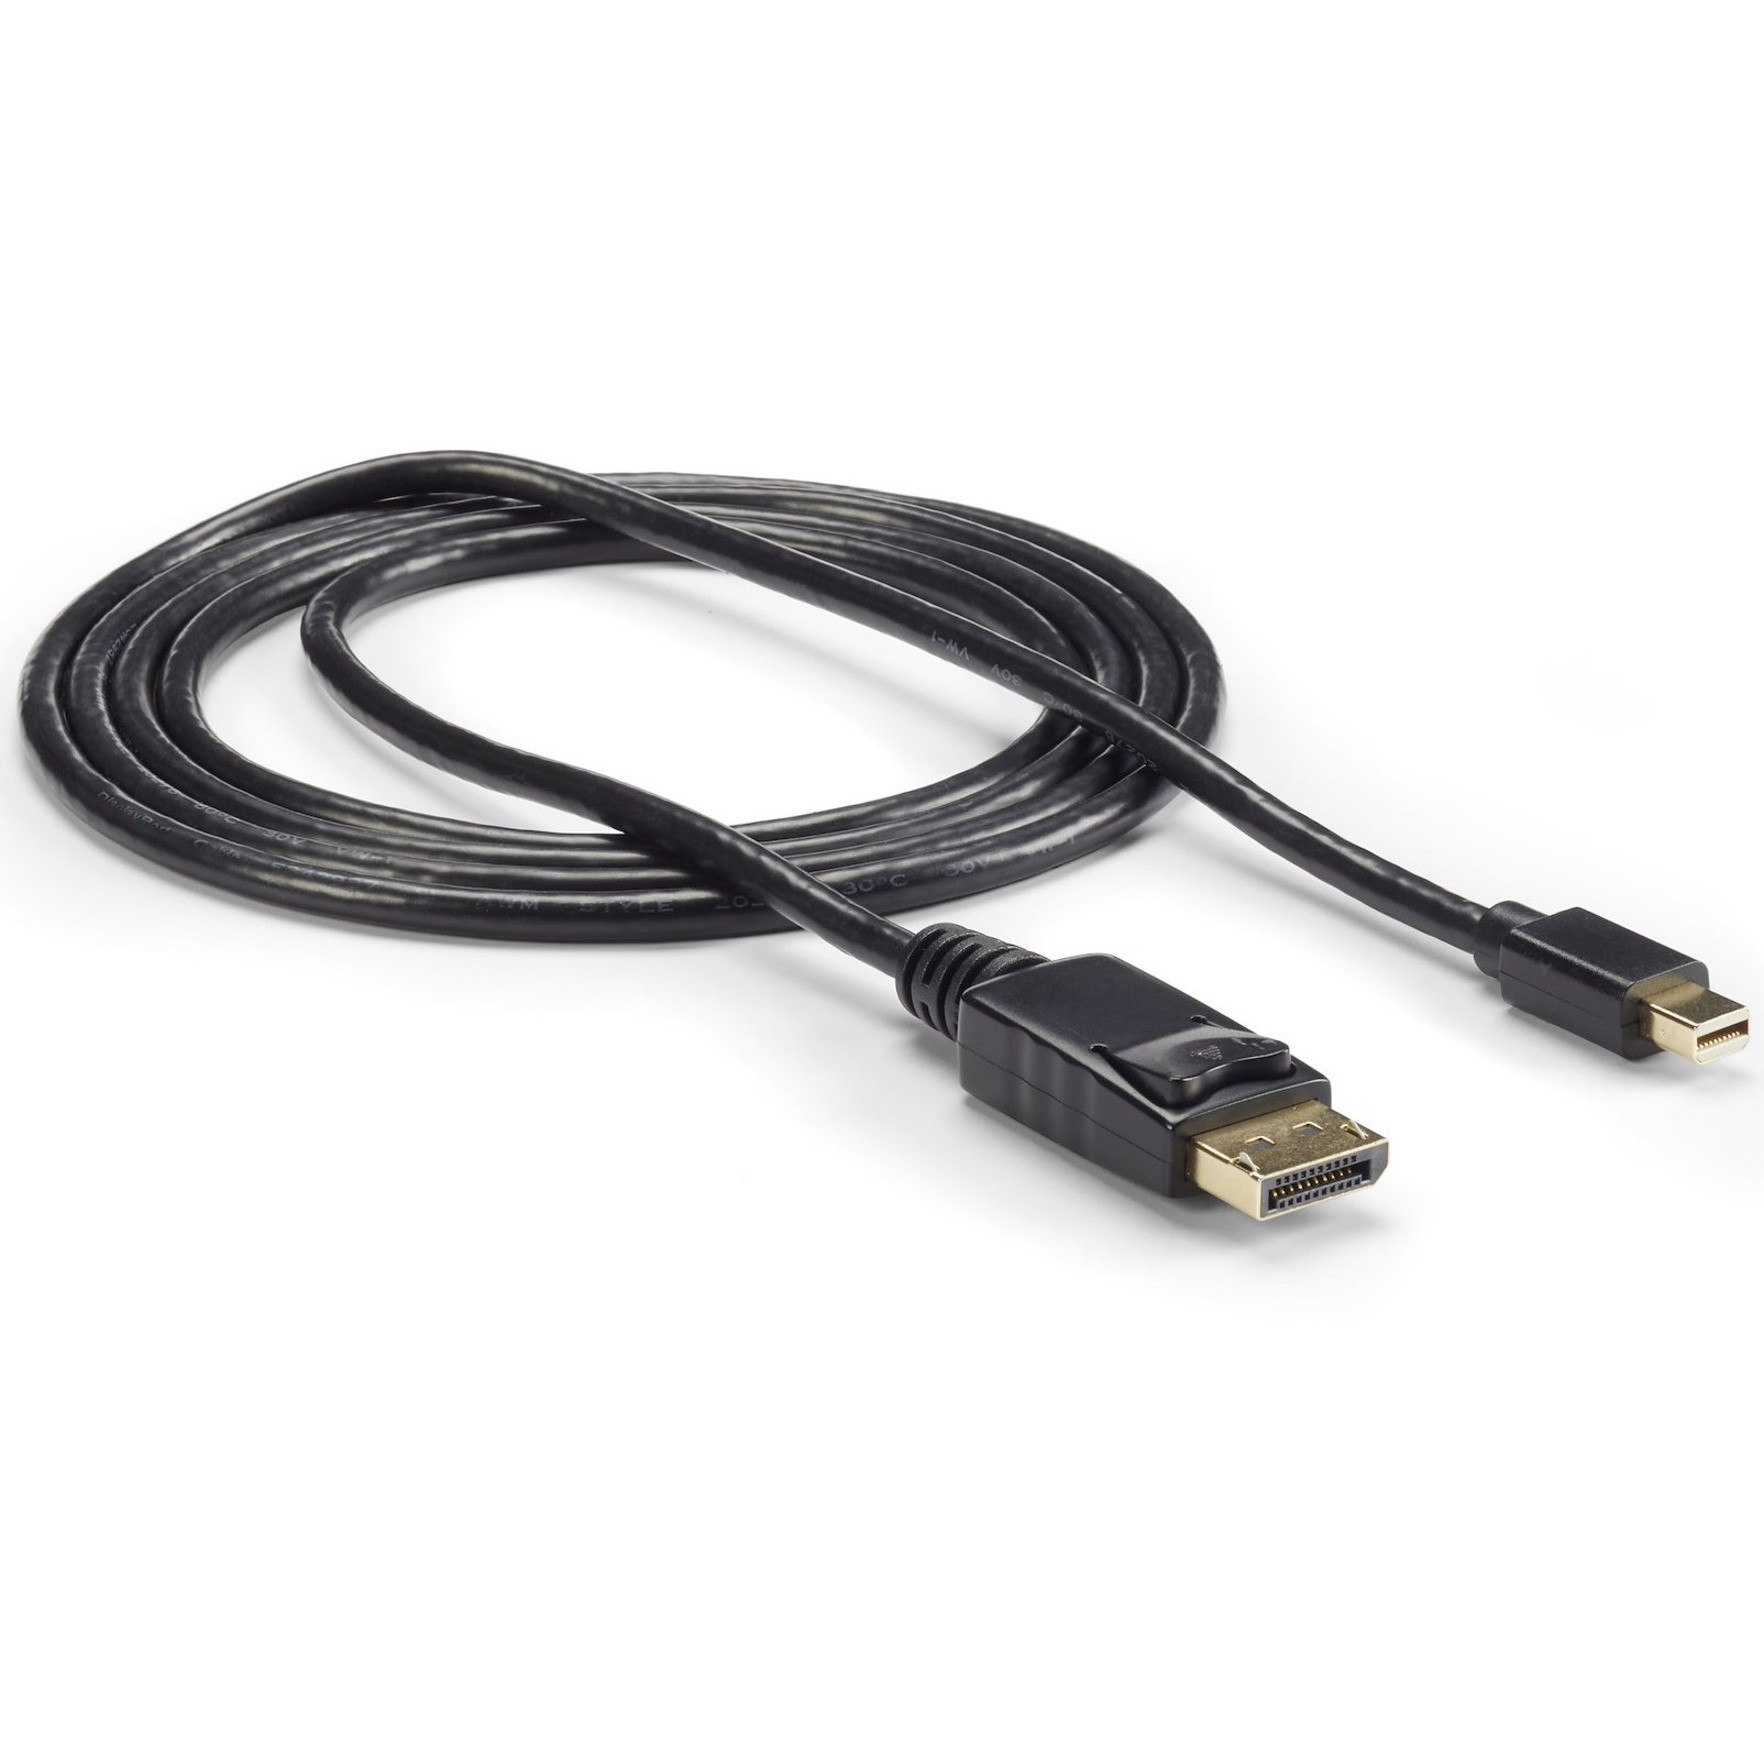 Displayport Device Cable - 6 ft